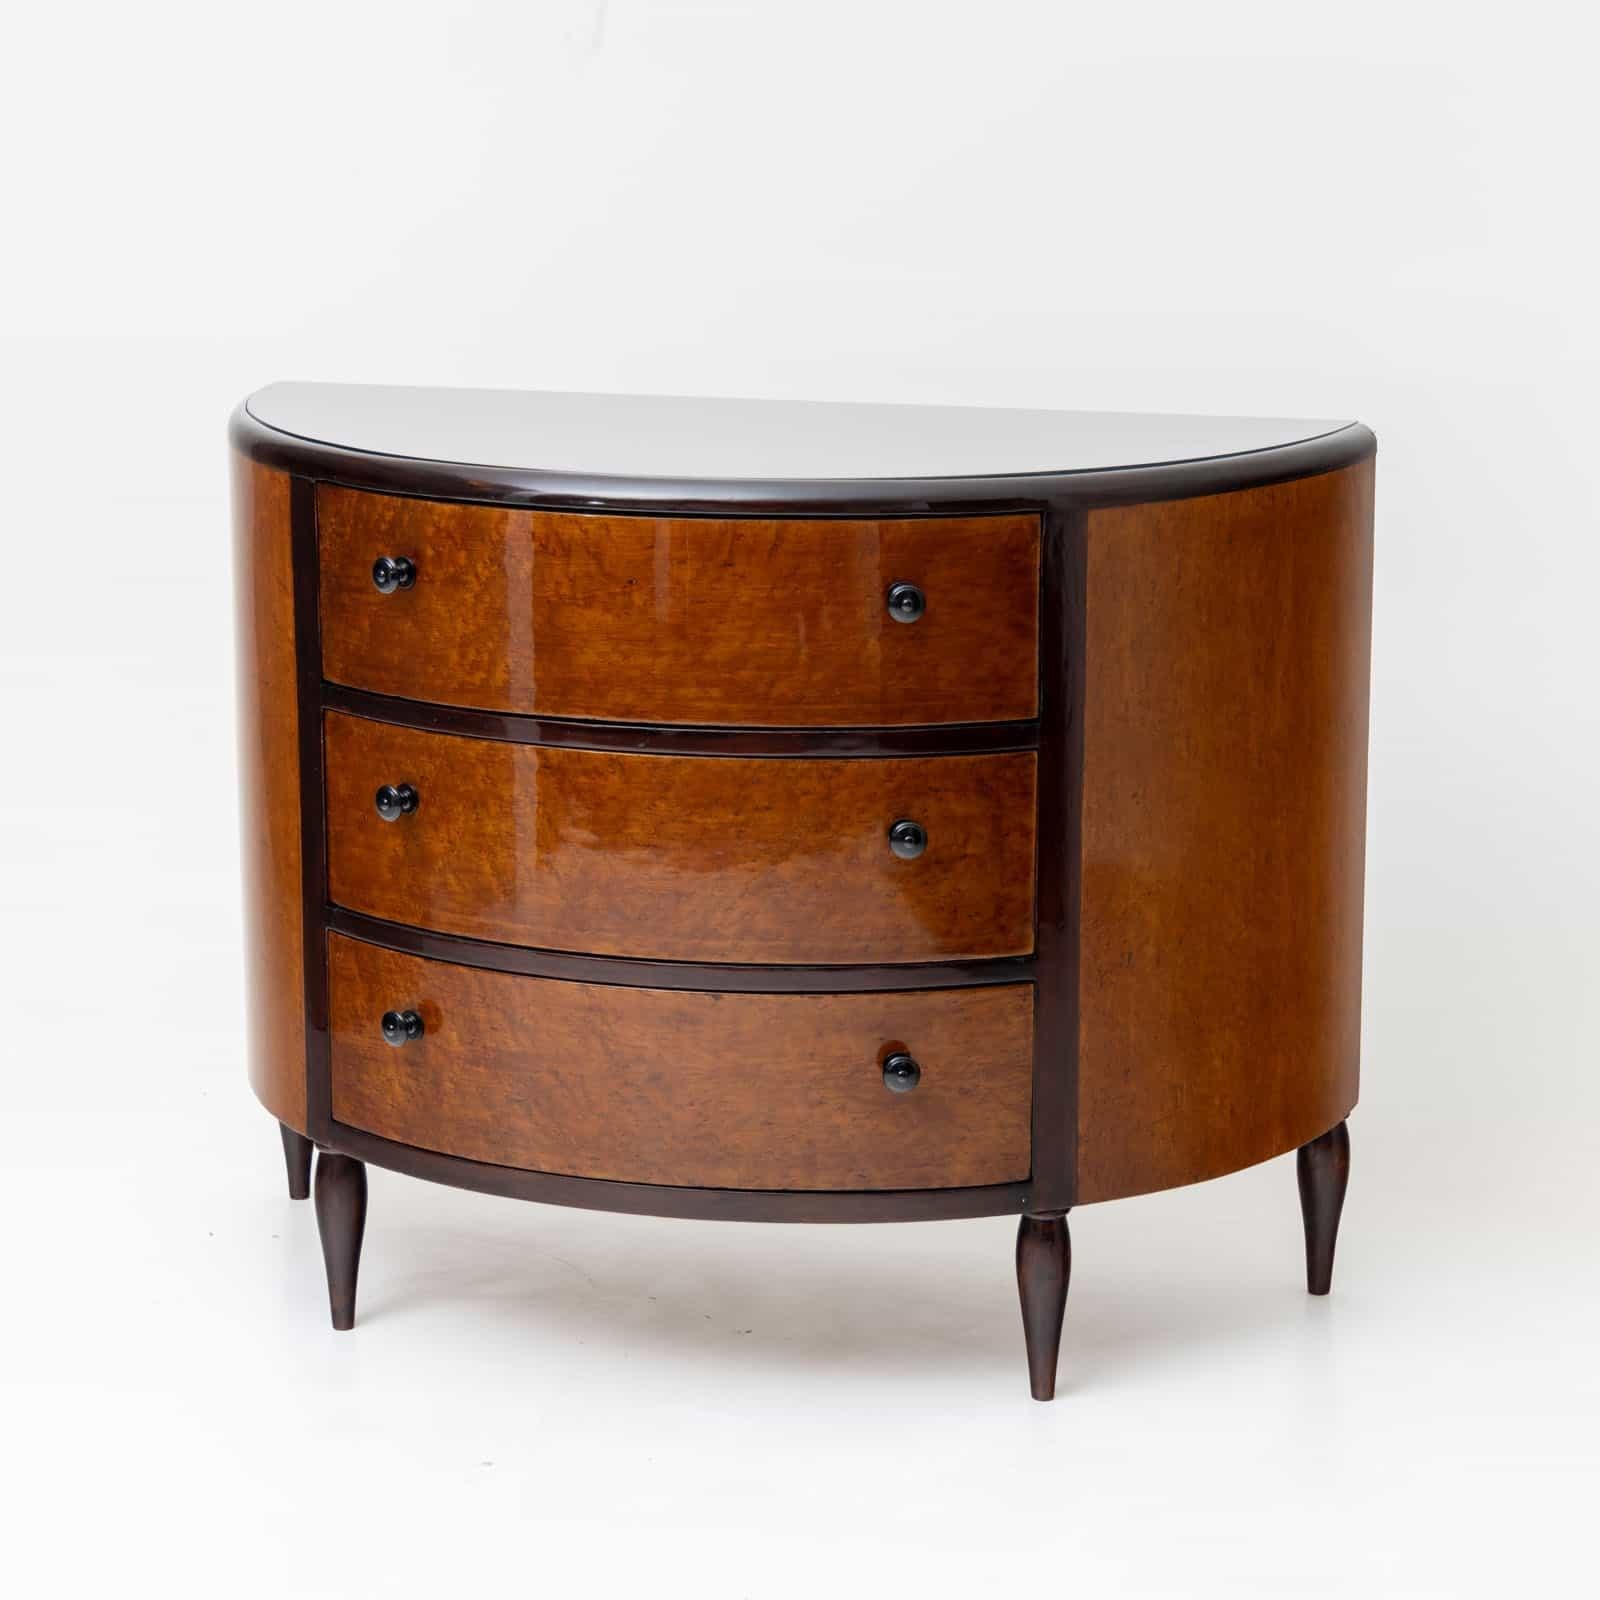 Art Deco chest of drawers in demi-lune shape with three drawers and inlaid glass top. The chest of drawers stands on conical feet and is veneered in thuja root.